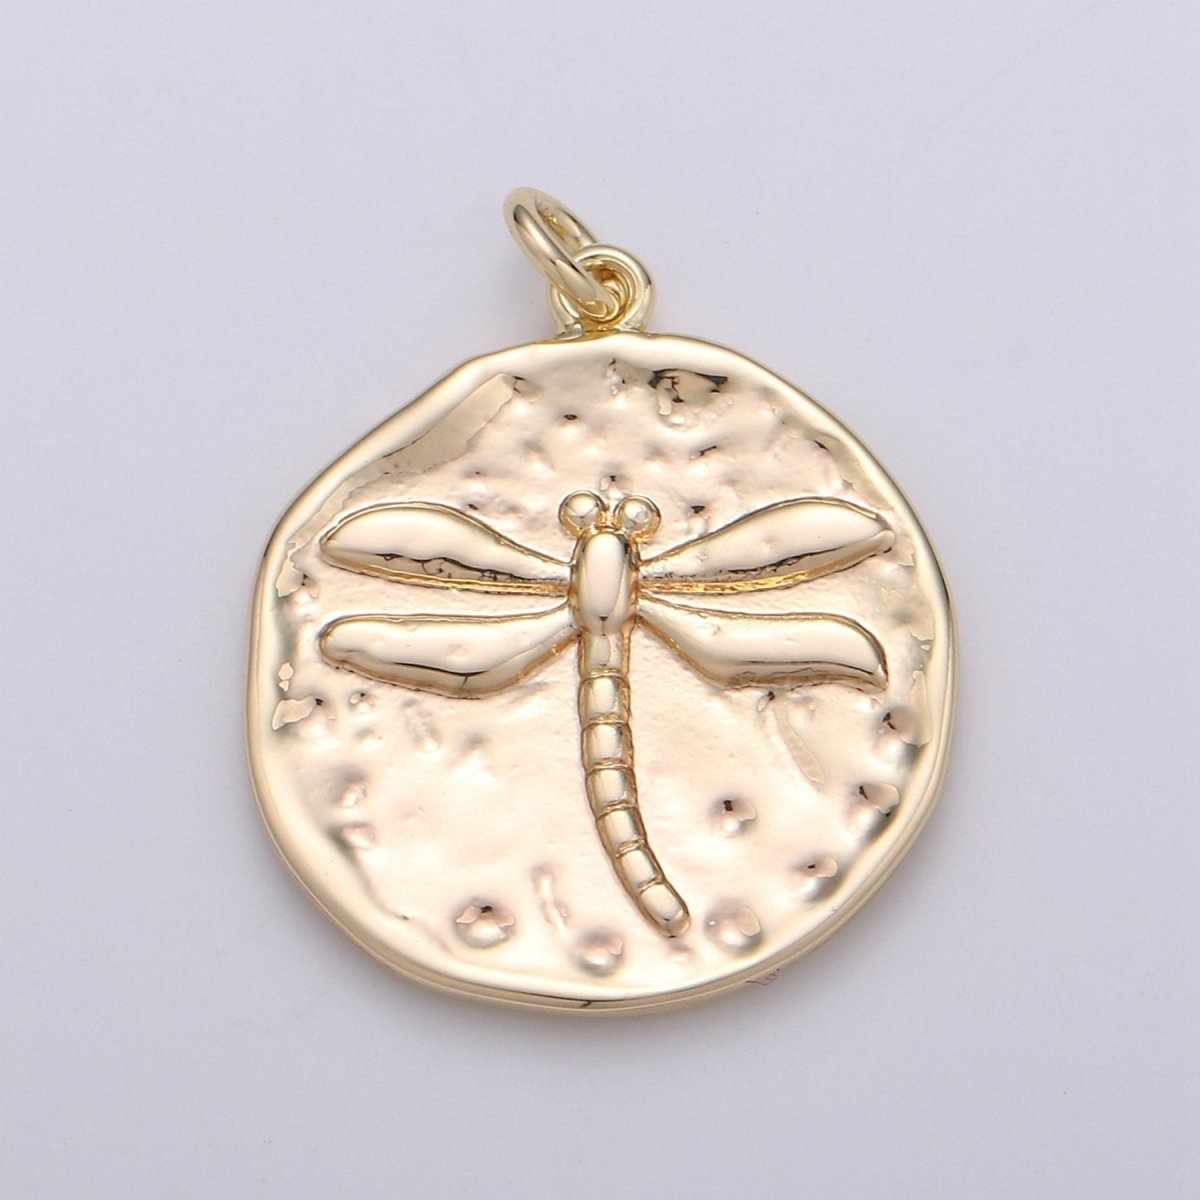 Rustic Coin Charm 14k Gold Filled coin pendant, Medallion charms Dragon Fly coin charms, Insect Disc Charm for Necklace Bracelet Earring D-389 - DLUXCA